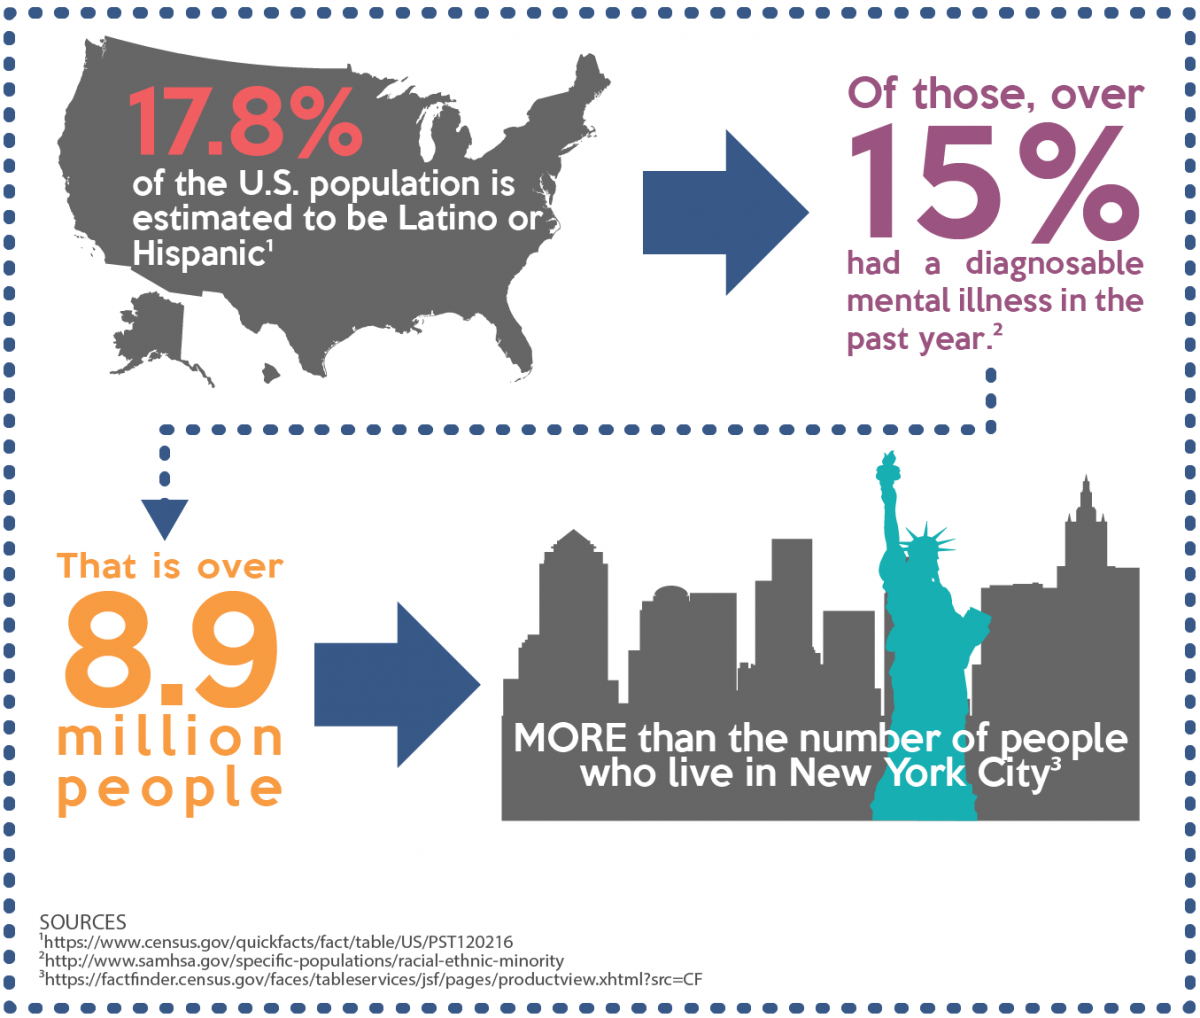 Prevalence of Mental Health Issues Among Latino/Hispanic Americans Infographic